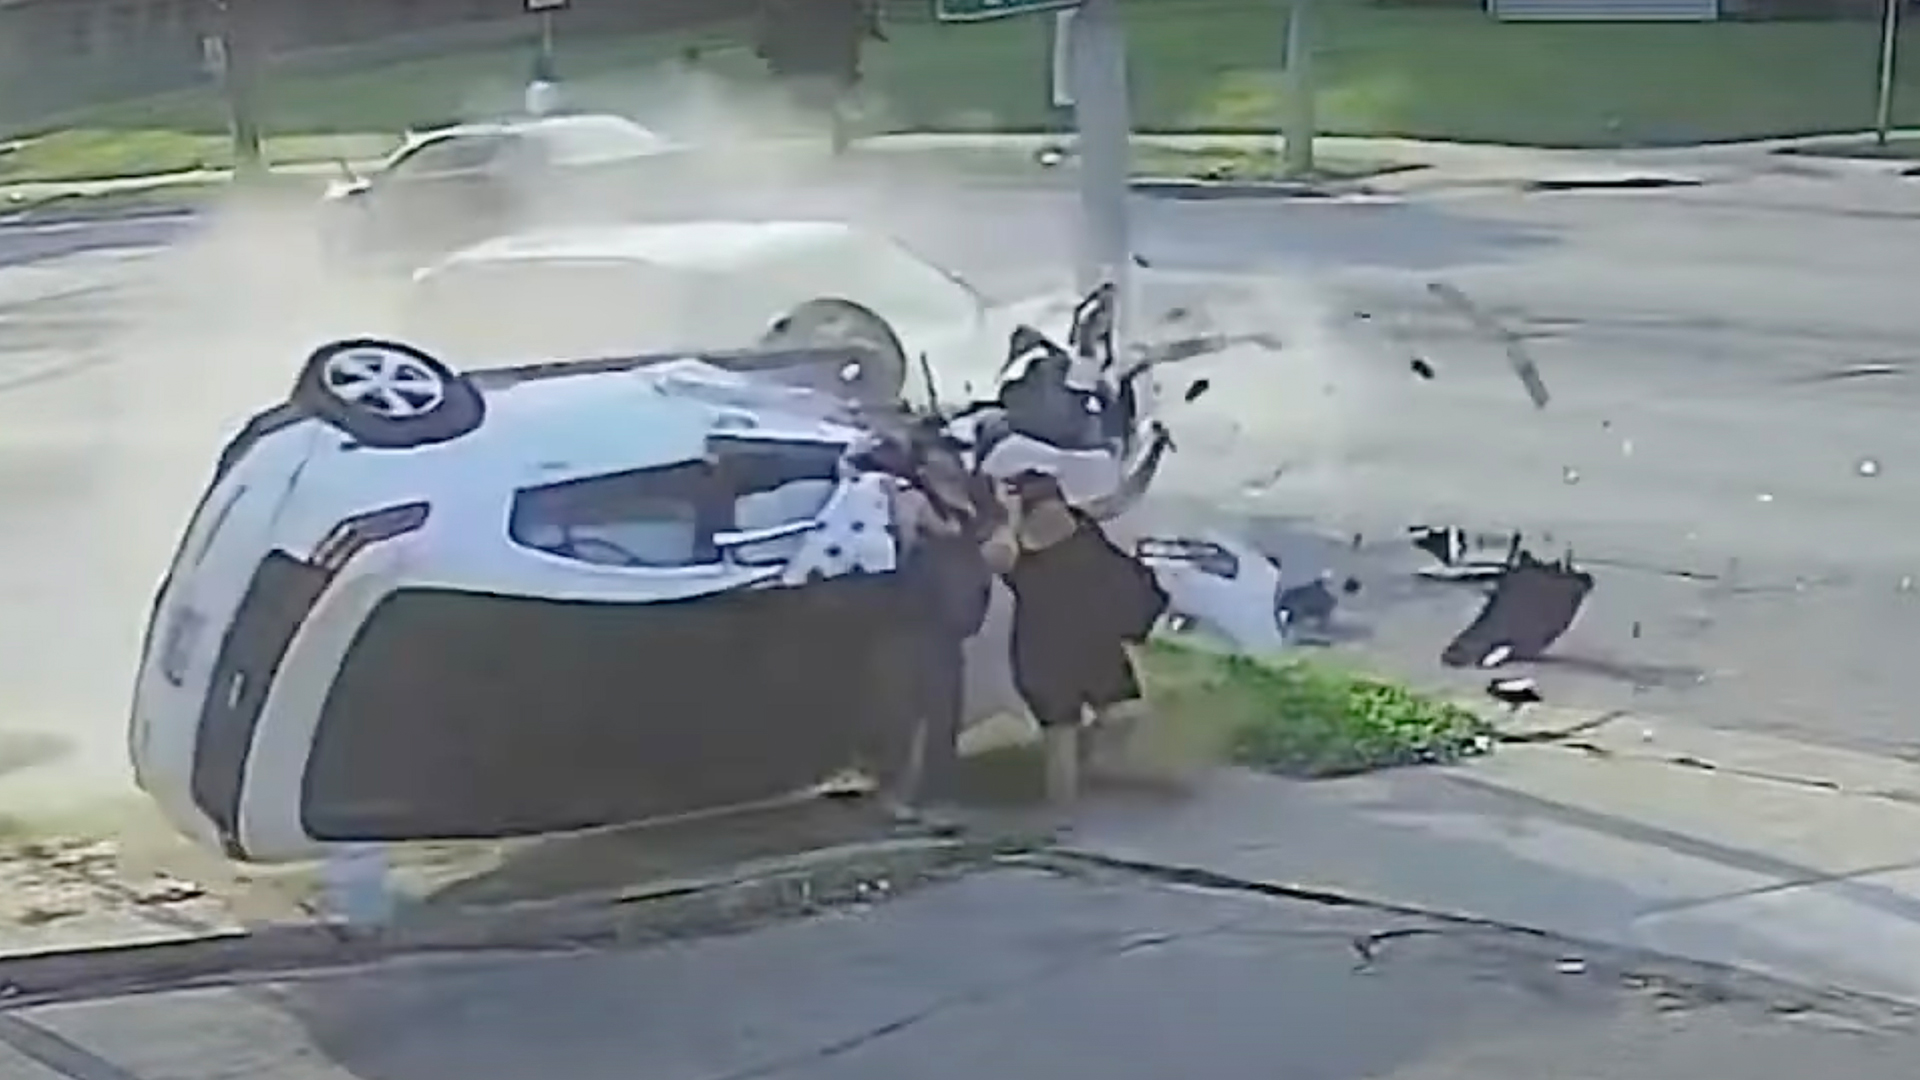 Heart-stopping moment out-of-control car barrels into couple on sidewalk – before unlikely item halts vehicle in instant [Video]